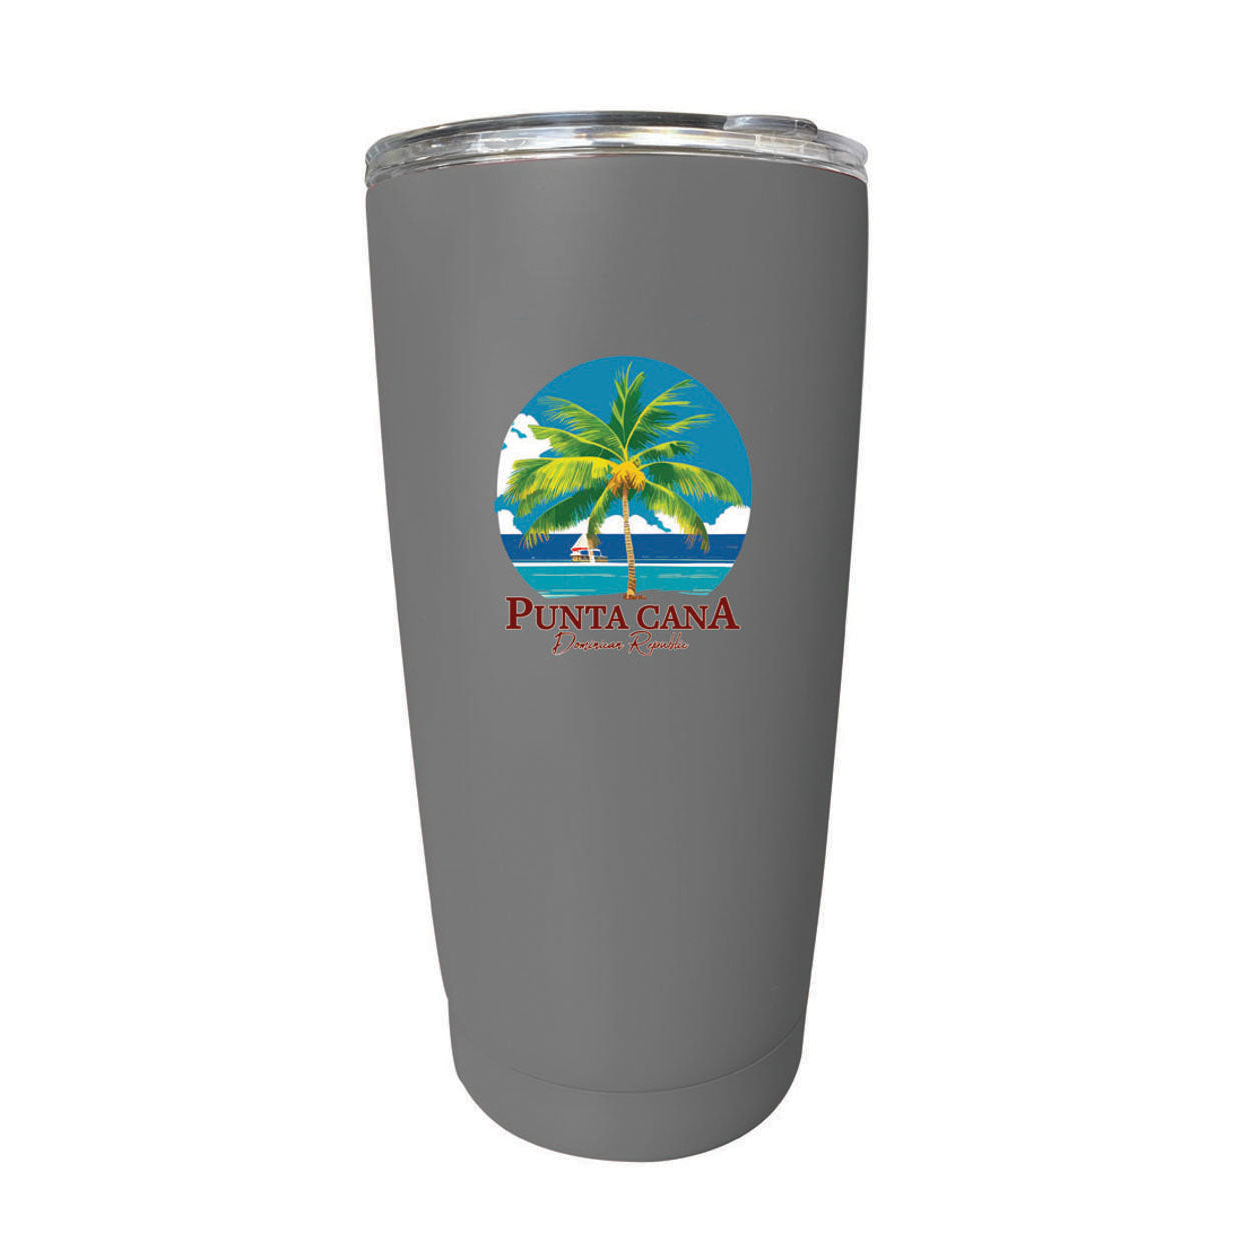 Punta Cana Dominican Republic Souvenir 16 Oz Stainless Steel Insulated Tumbler - Yellow, PARROT B